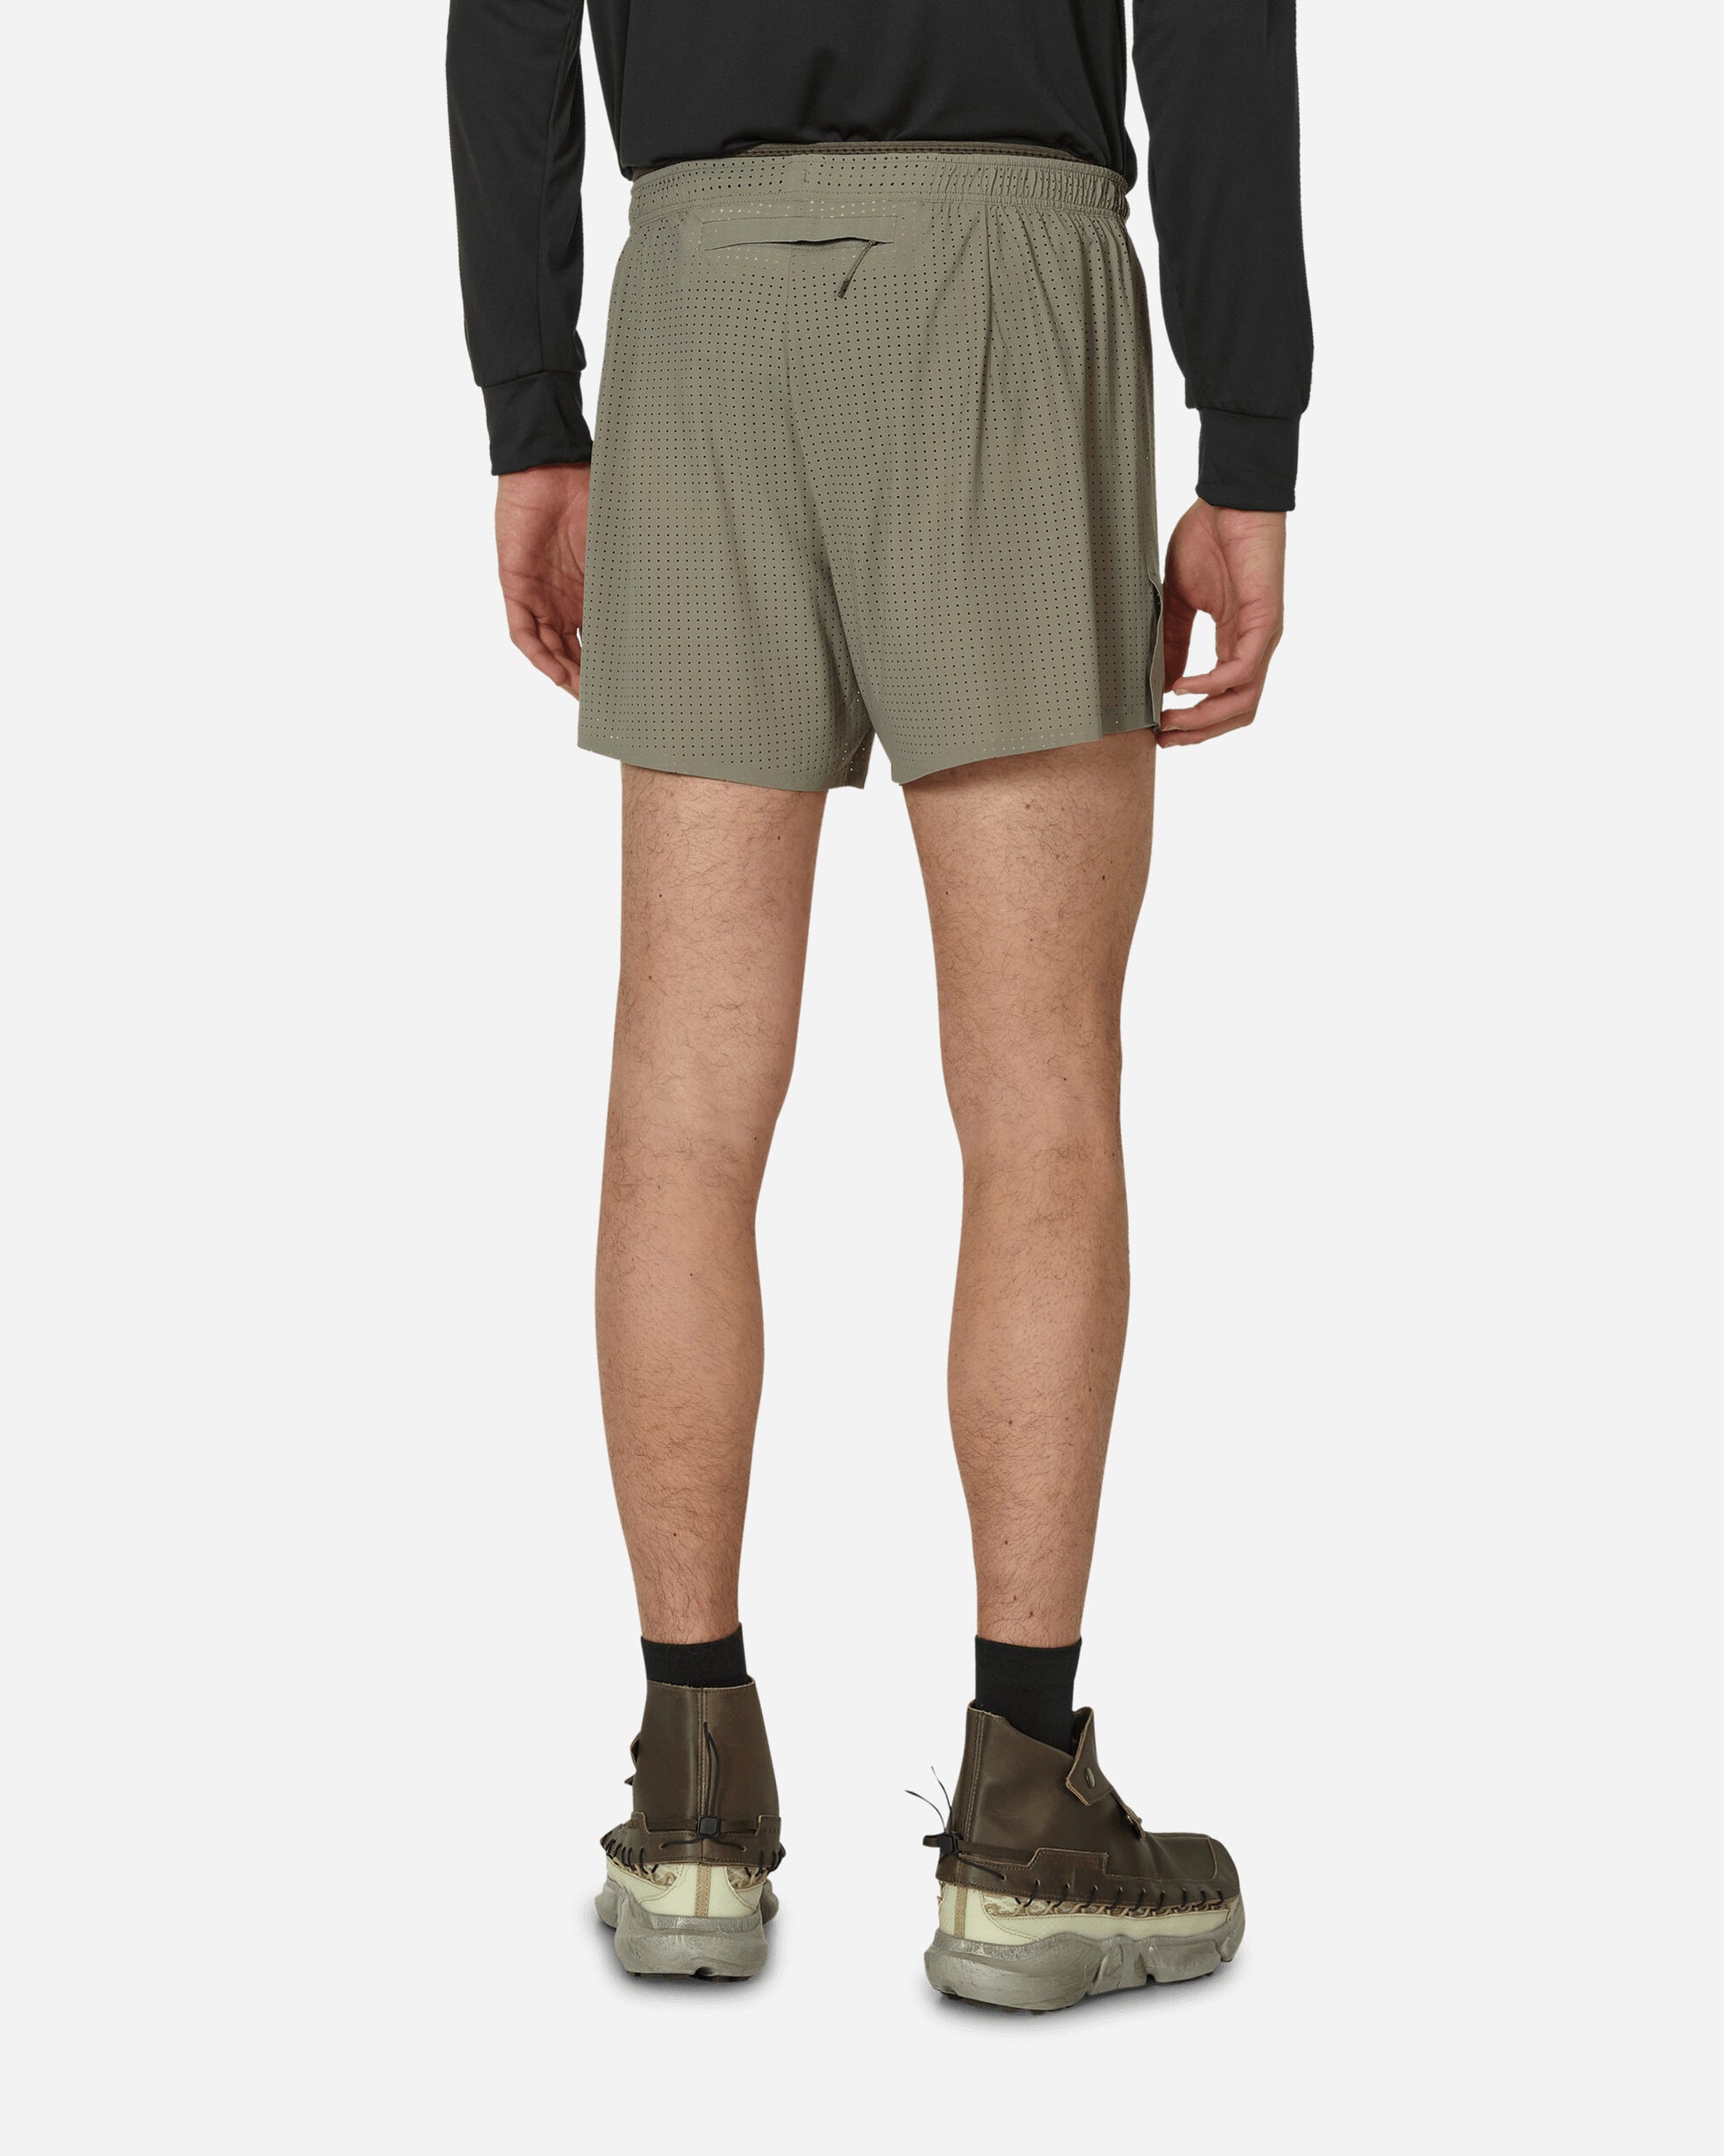 Satisfy Space-O 5" Shorts Dry Sage Shorts Short 5256 DS